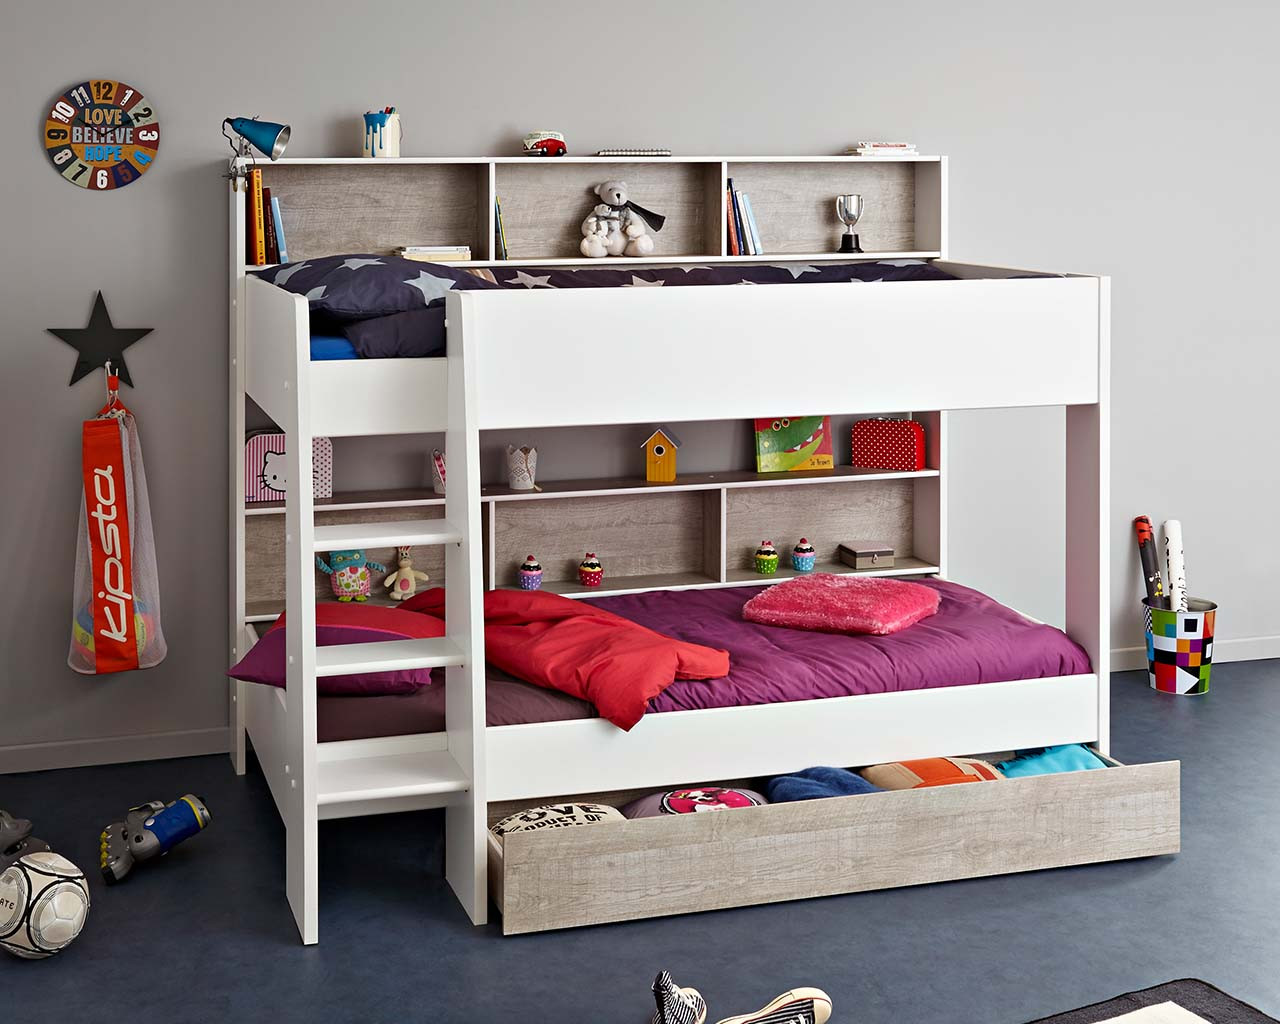 Tam Tam 3 bunk bed with bookshelves